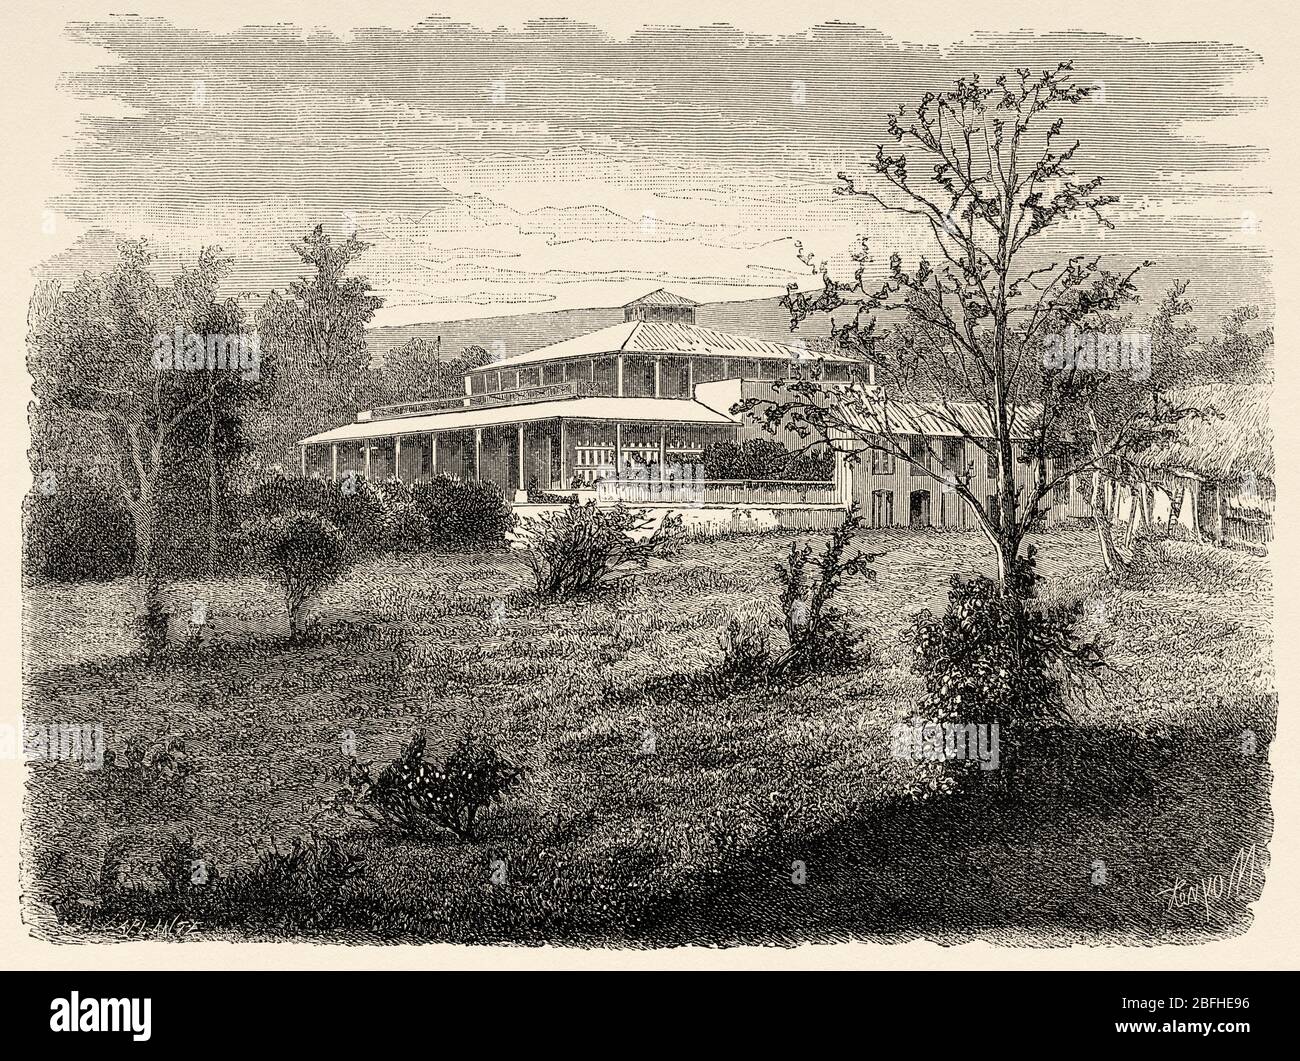 Governor residence in Noumea, New Caledonia. Old engraving illustration ...